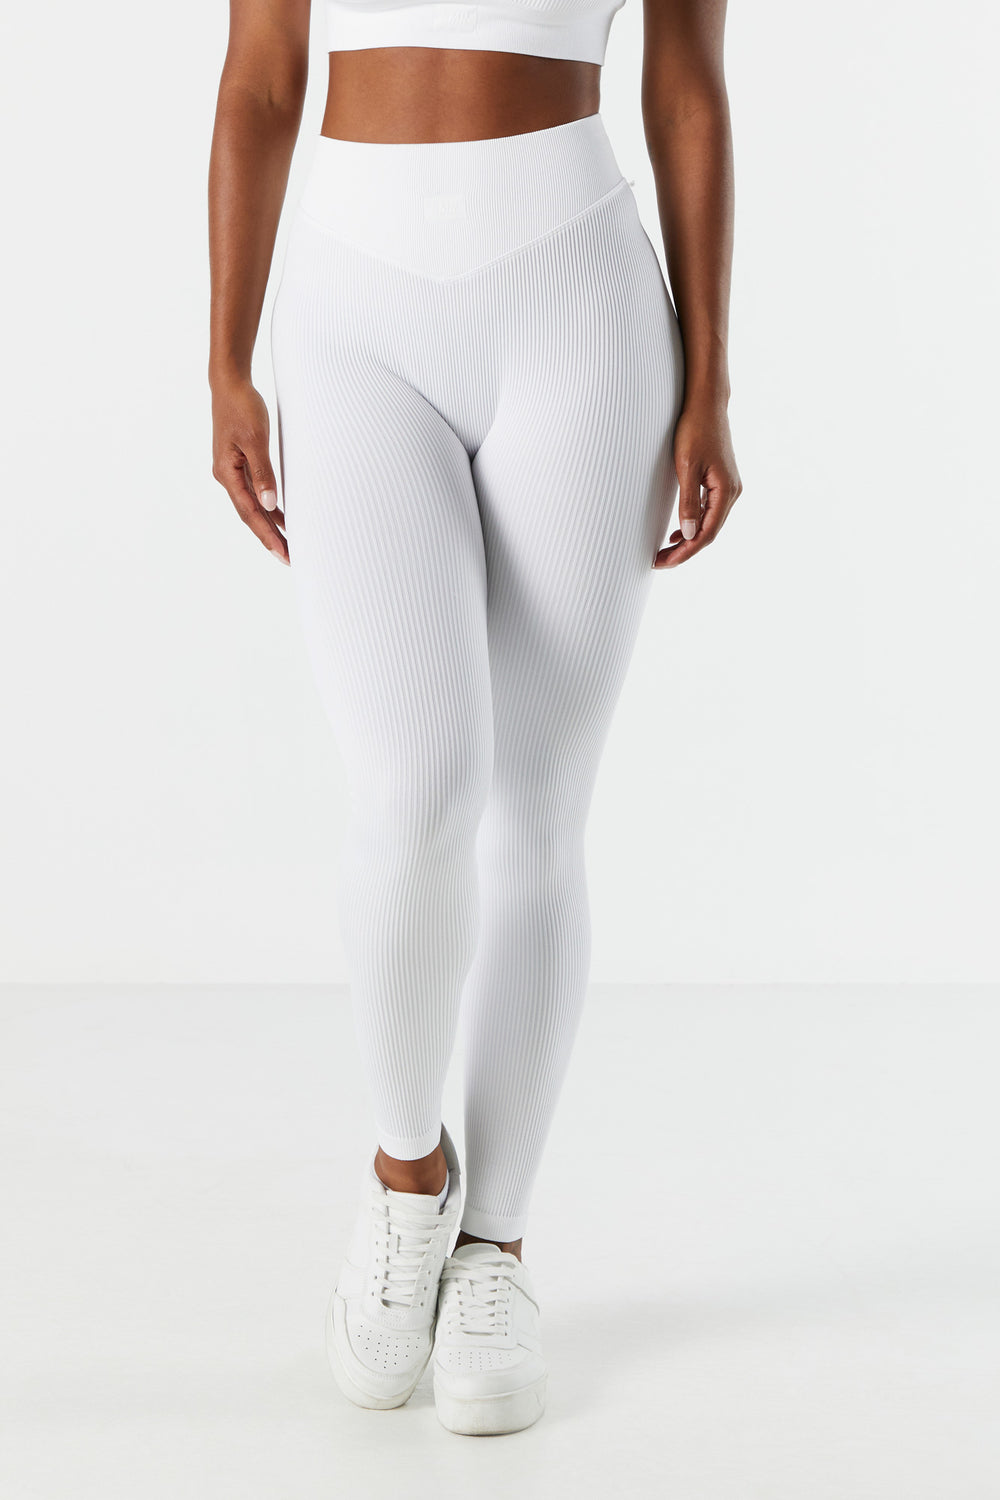 Sommer Ray Seamless Ribbed Active Legging Sommer Ray Seamless Ribbed Active Legging 17